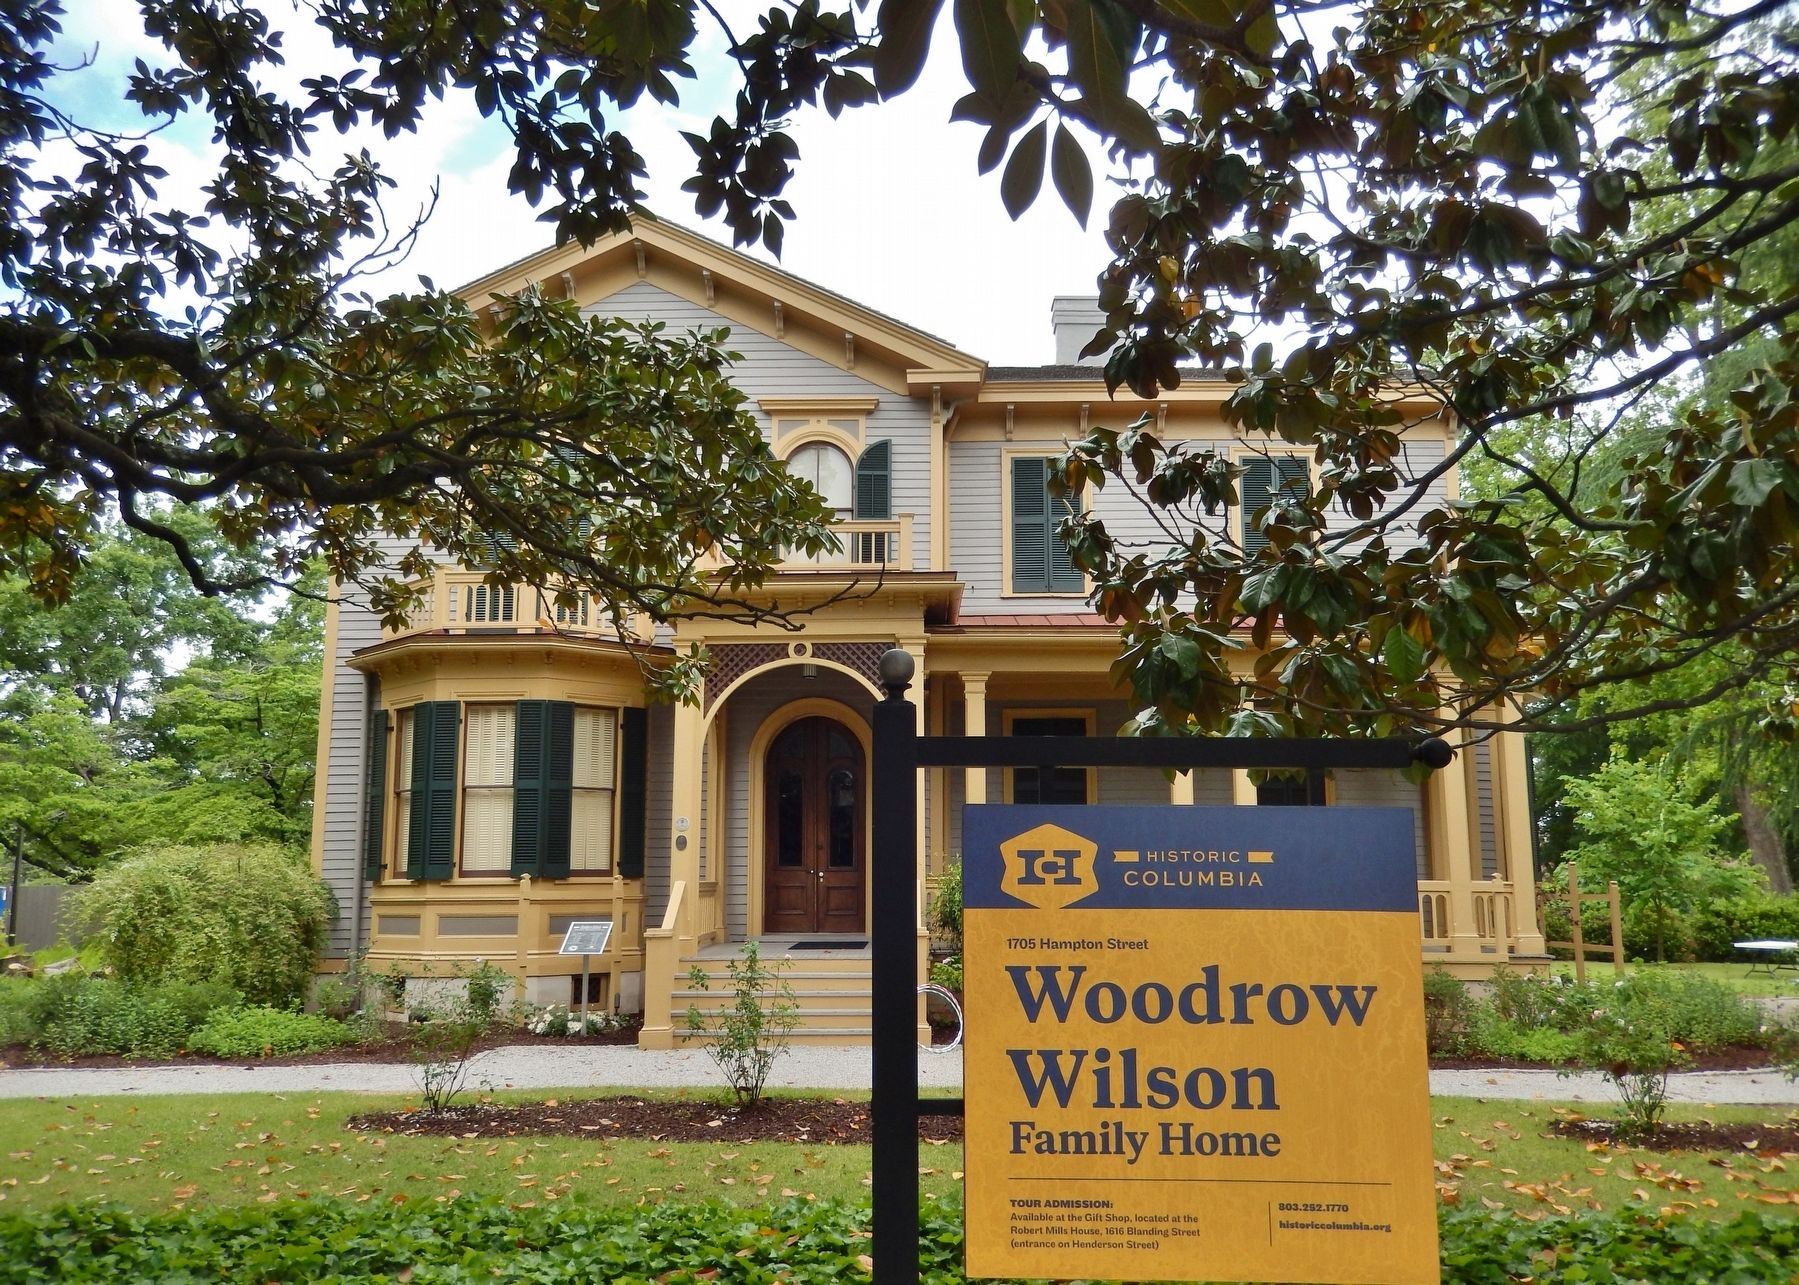 Woodrow Wilson Family Home (<i>front view from Hampton Street</i>) image. Click for full size.